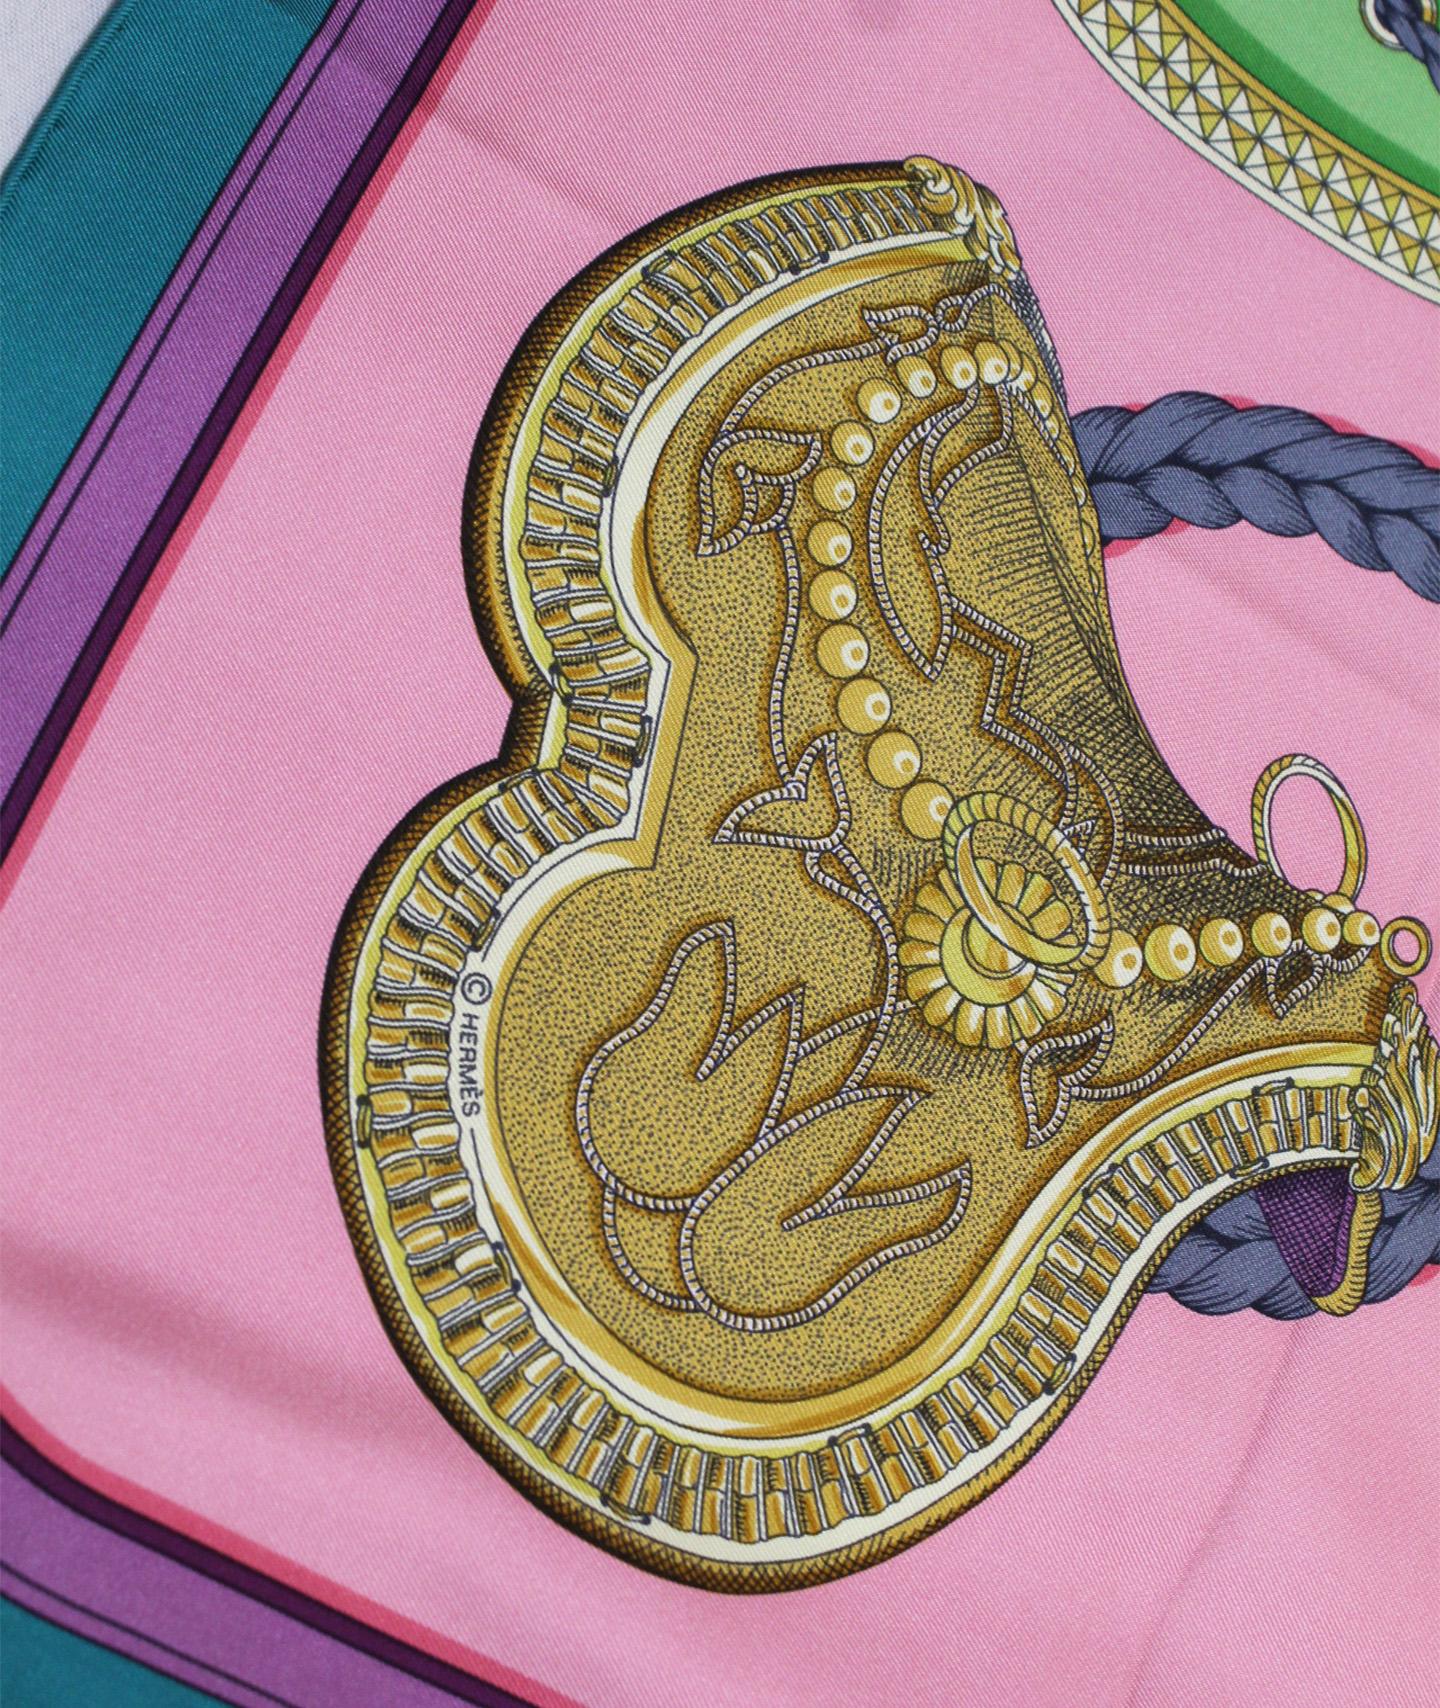 
Hermes silk scarf in green, rose and pistache colors the Grand Apparat, the Great Pageantry, was  first issued in 1962  and was created by Jacques Eudel and reissued in 2010 and 2012.  The emblematic French House of Hermes launched its now famous